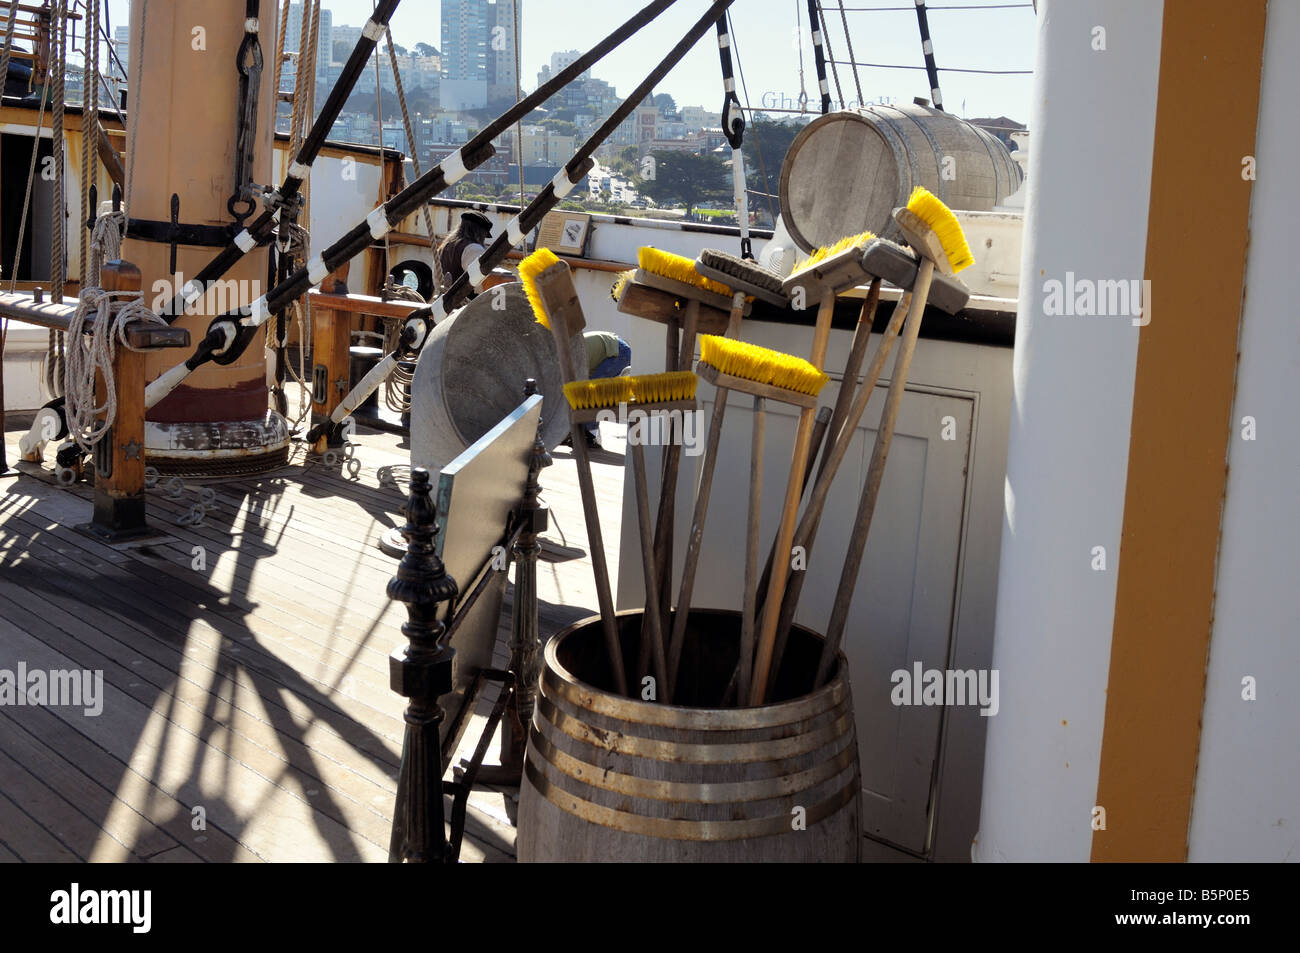 brooms in a barrel on a ship deck Stock Photo